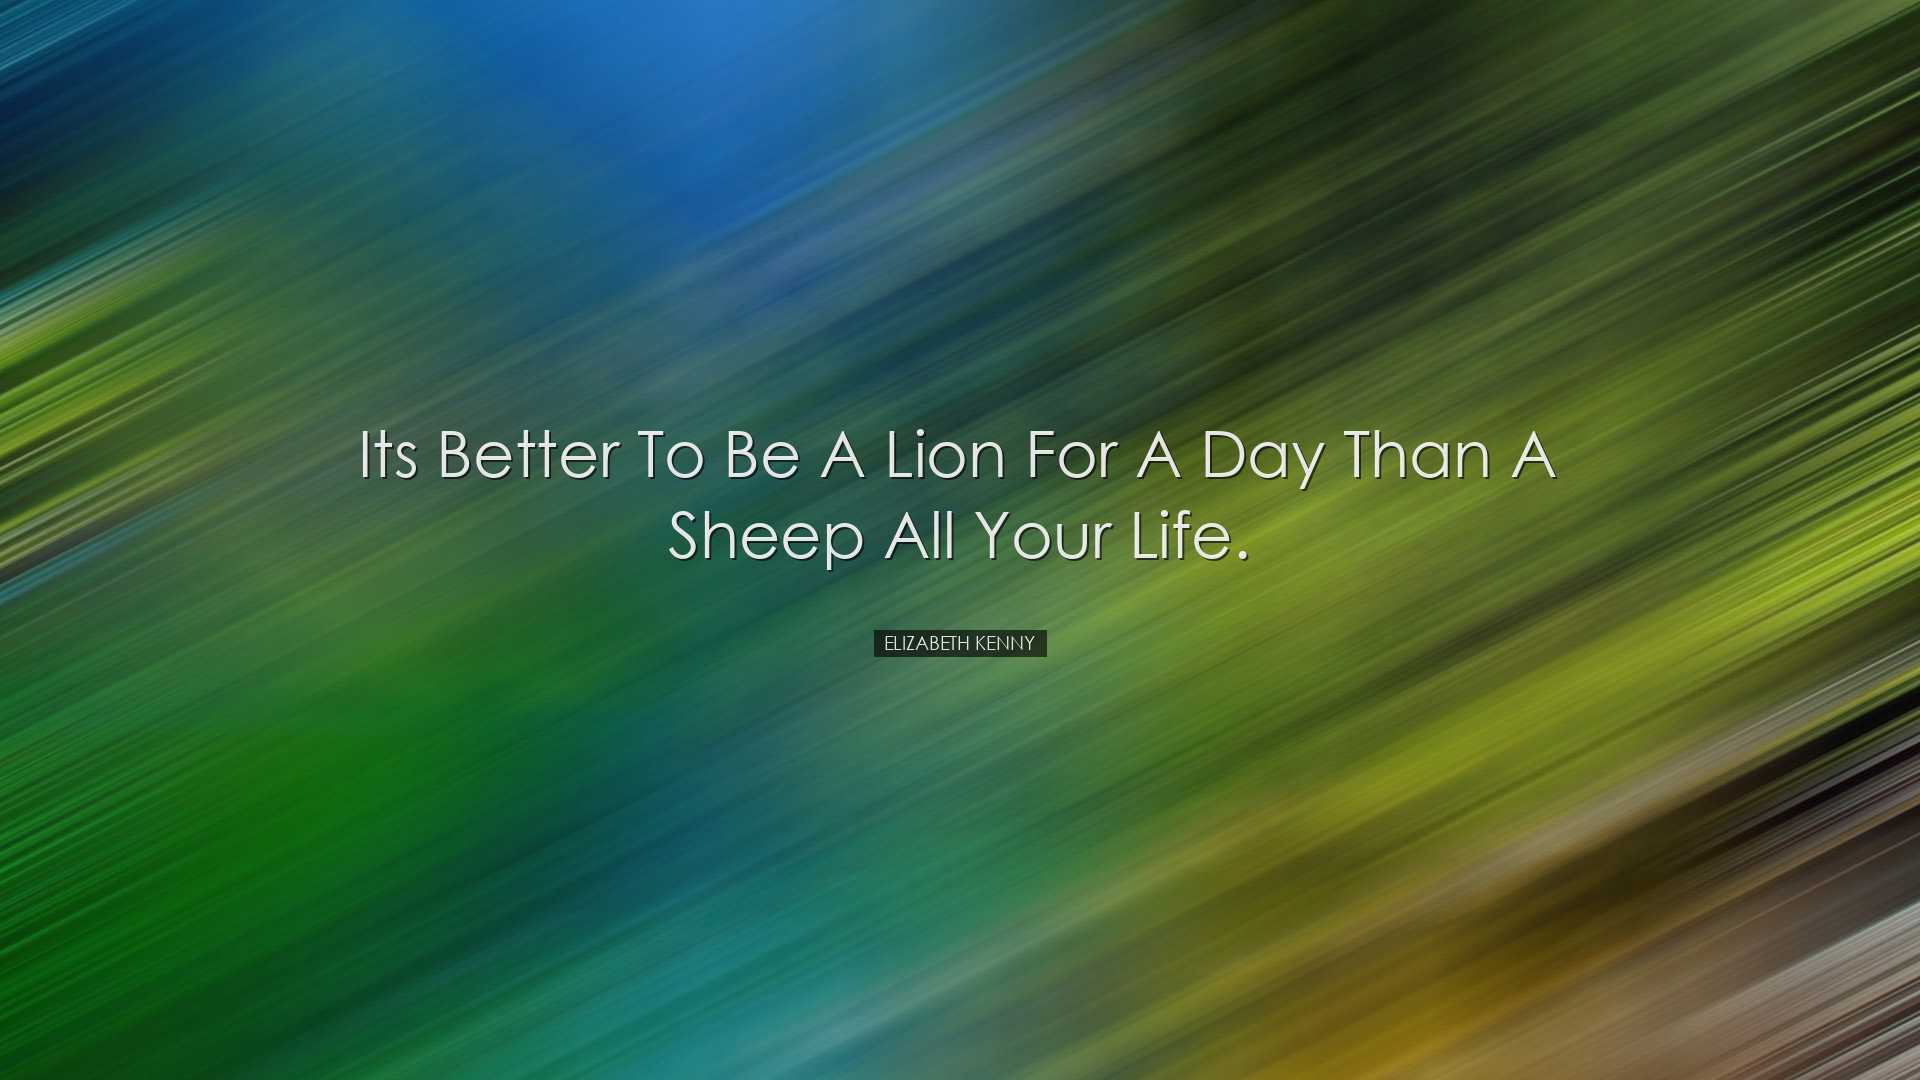 Its better to be a lion for a day than a sheep all your life. - El